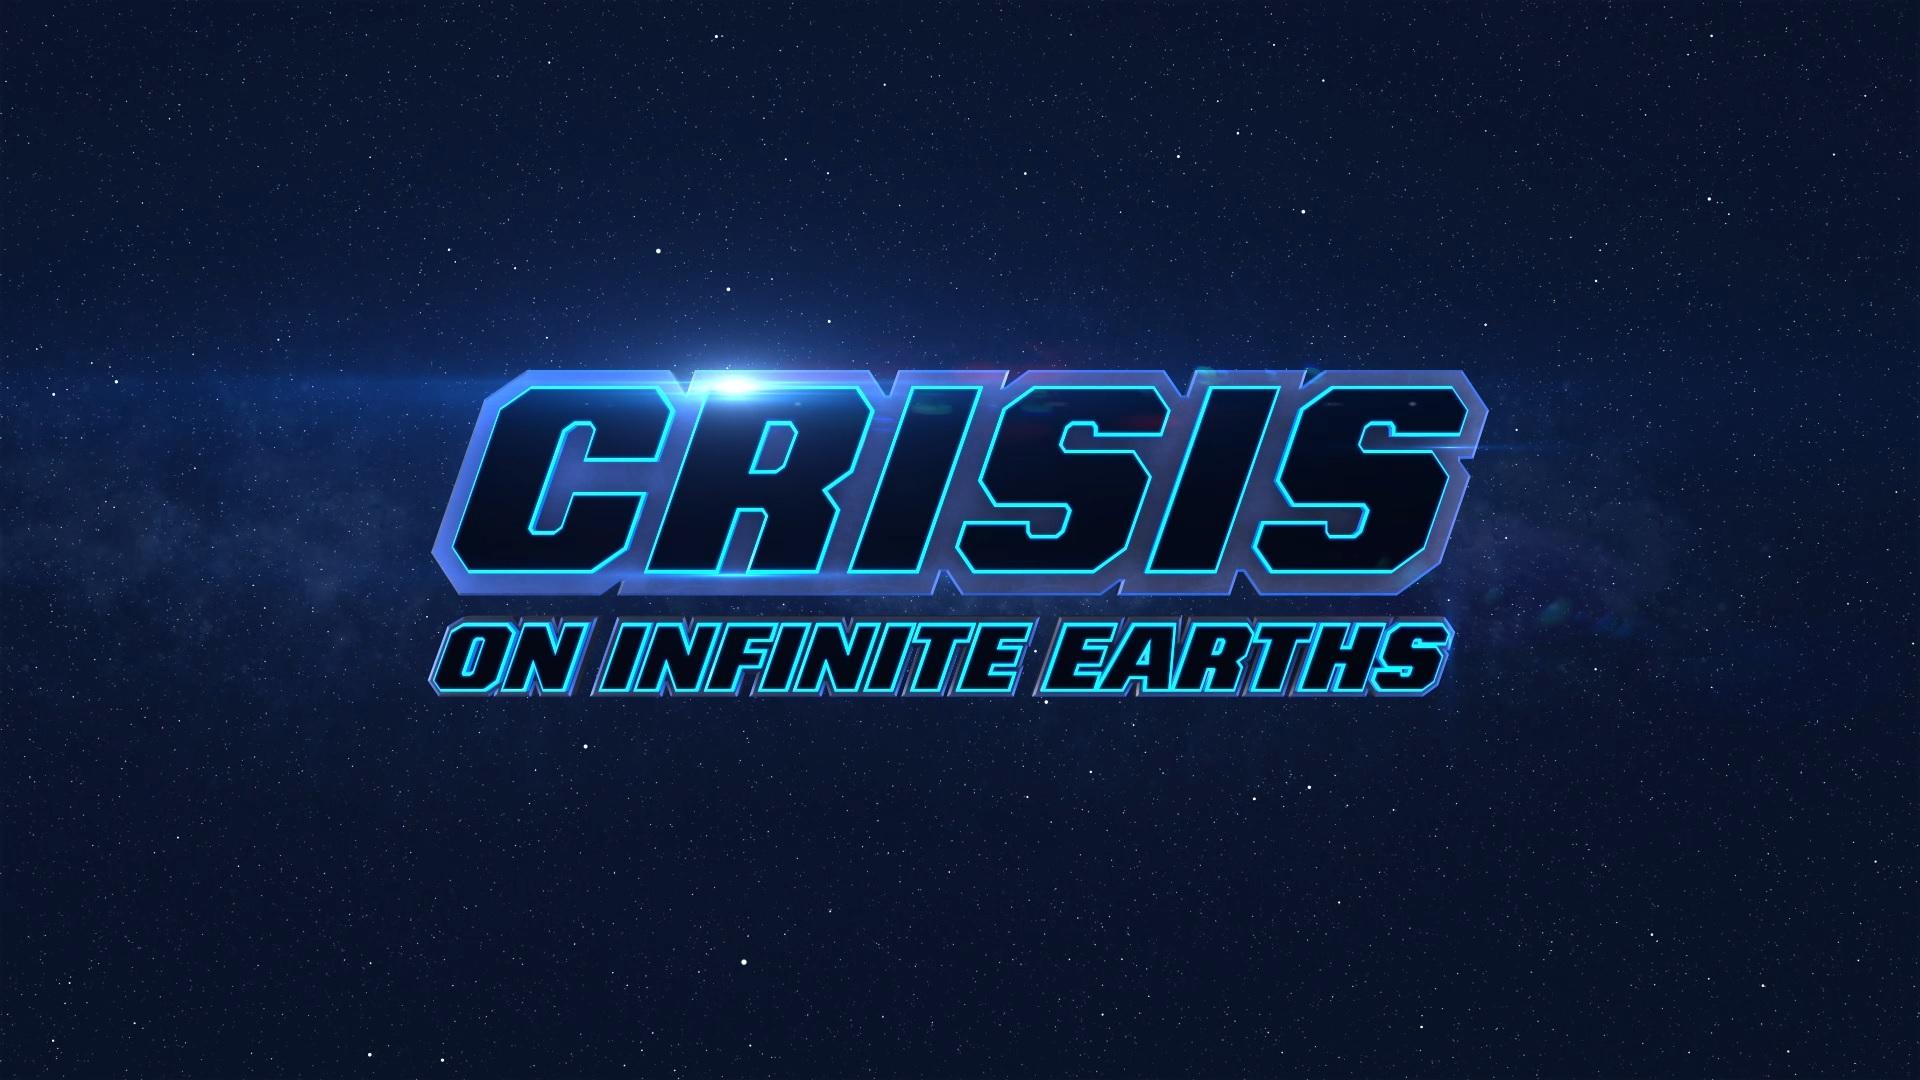 LIVE Crisis on Infinite Earths Podcast Crossover On Dec 11